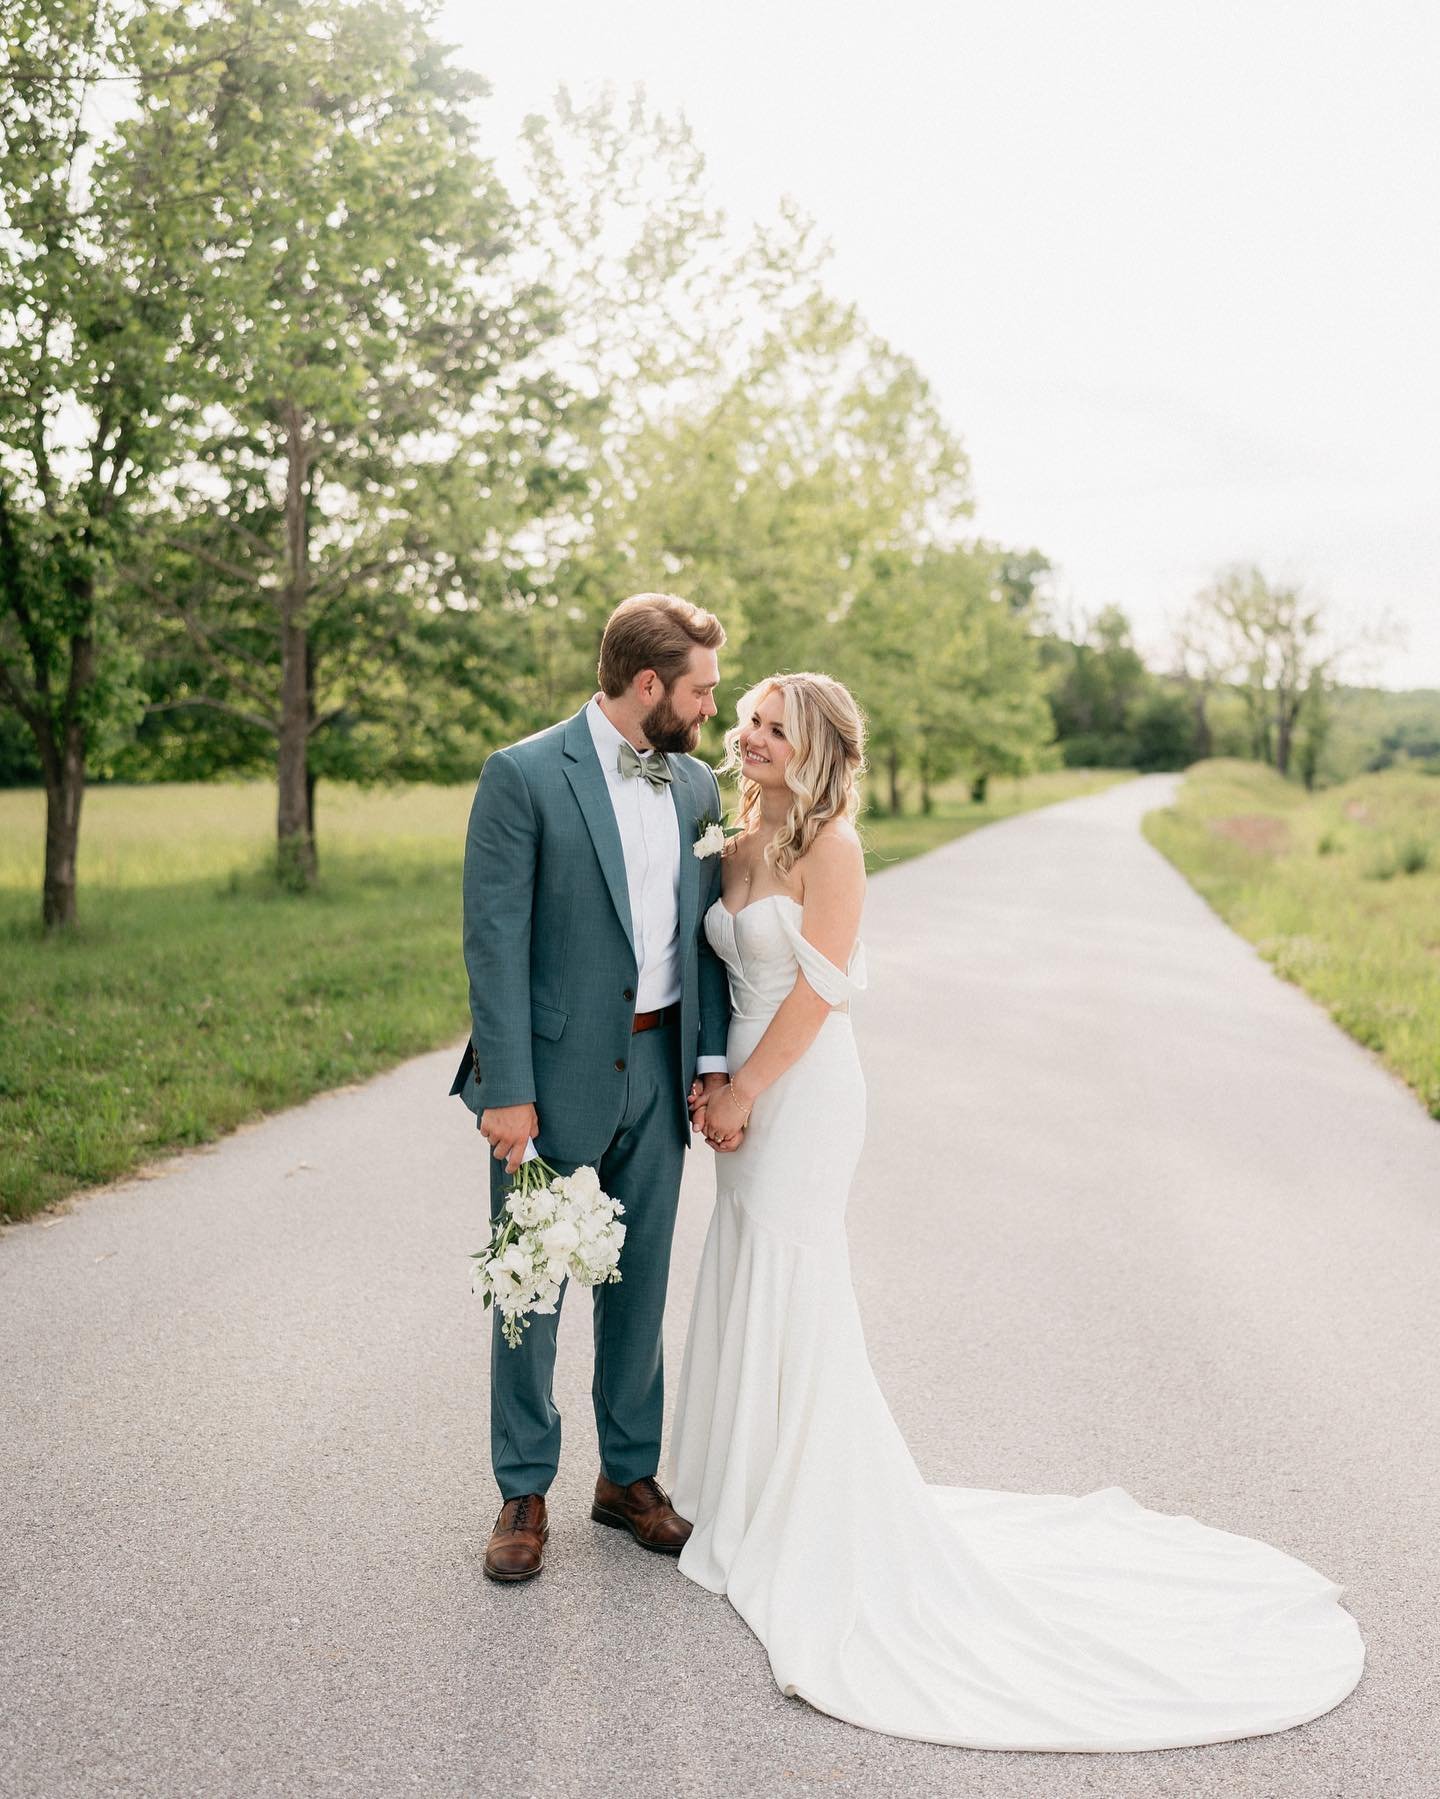 Tent weddings on private land will always be a favorite of mine! Ian and Sydney had a small, elegant wedding with their closest friends and family. Plus they had a great team of vendors who brought their amazing vision to life!

Planning and design -